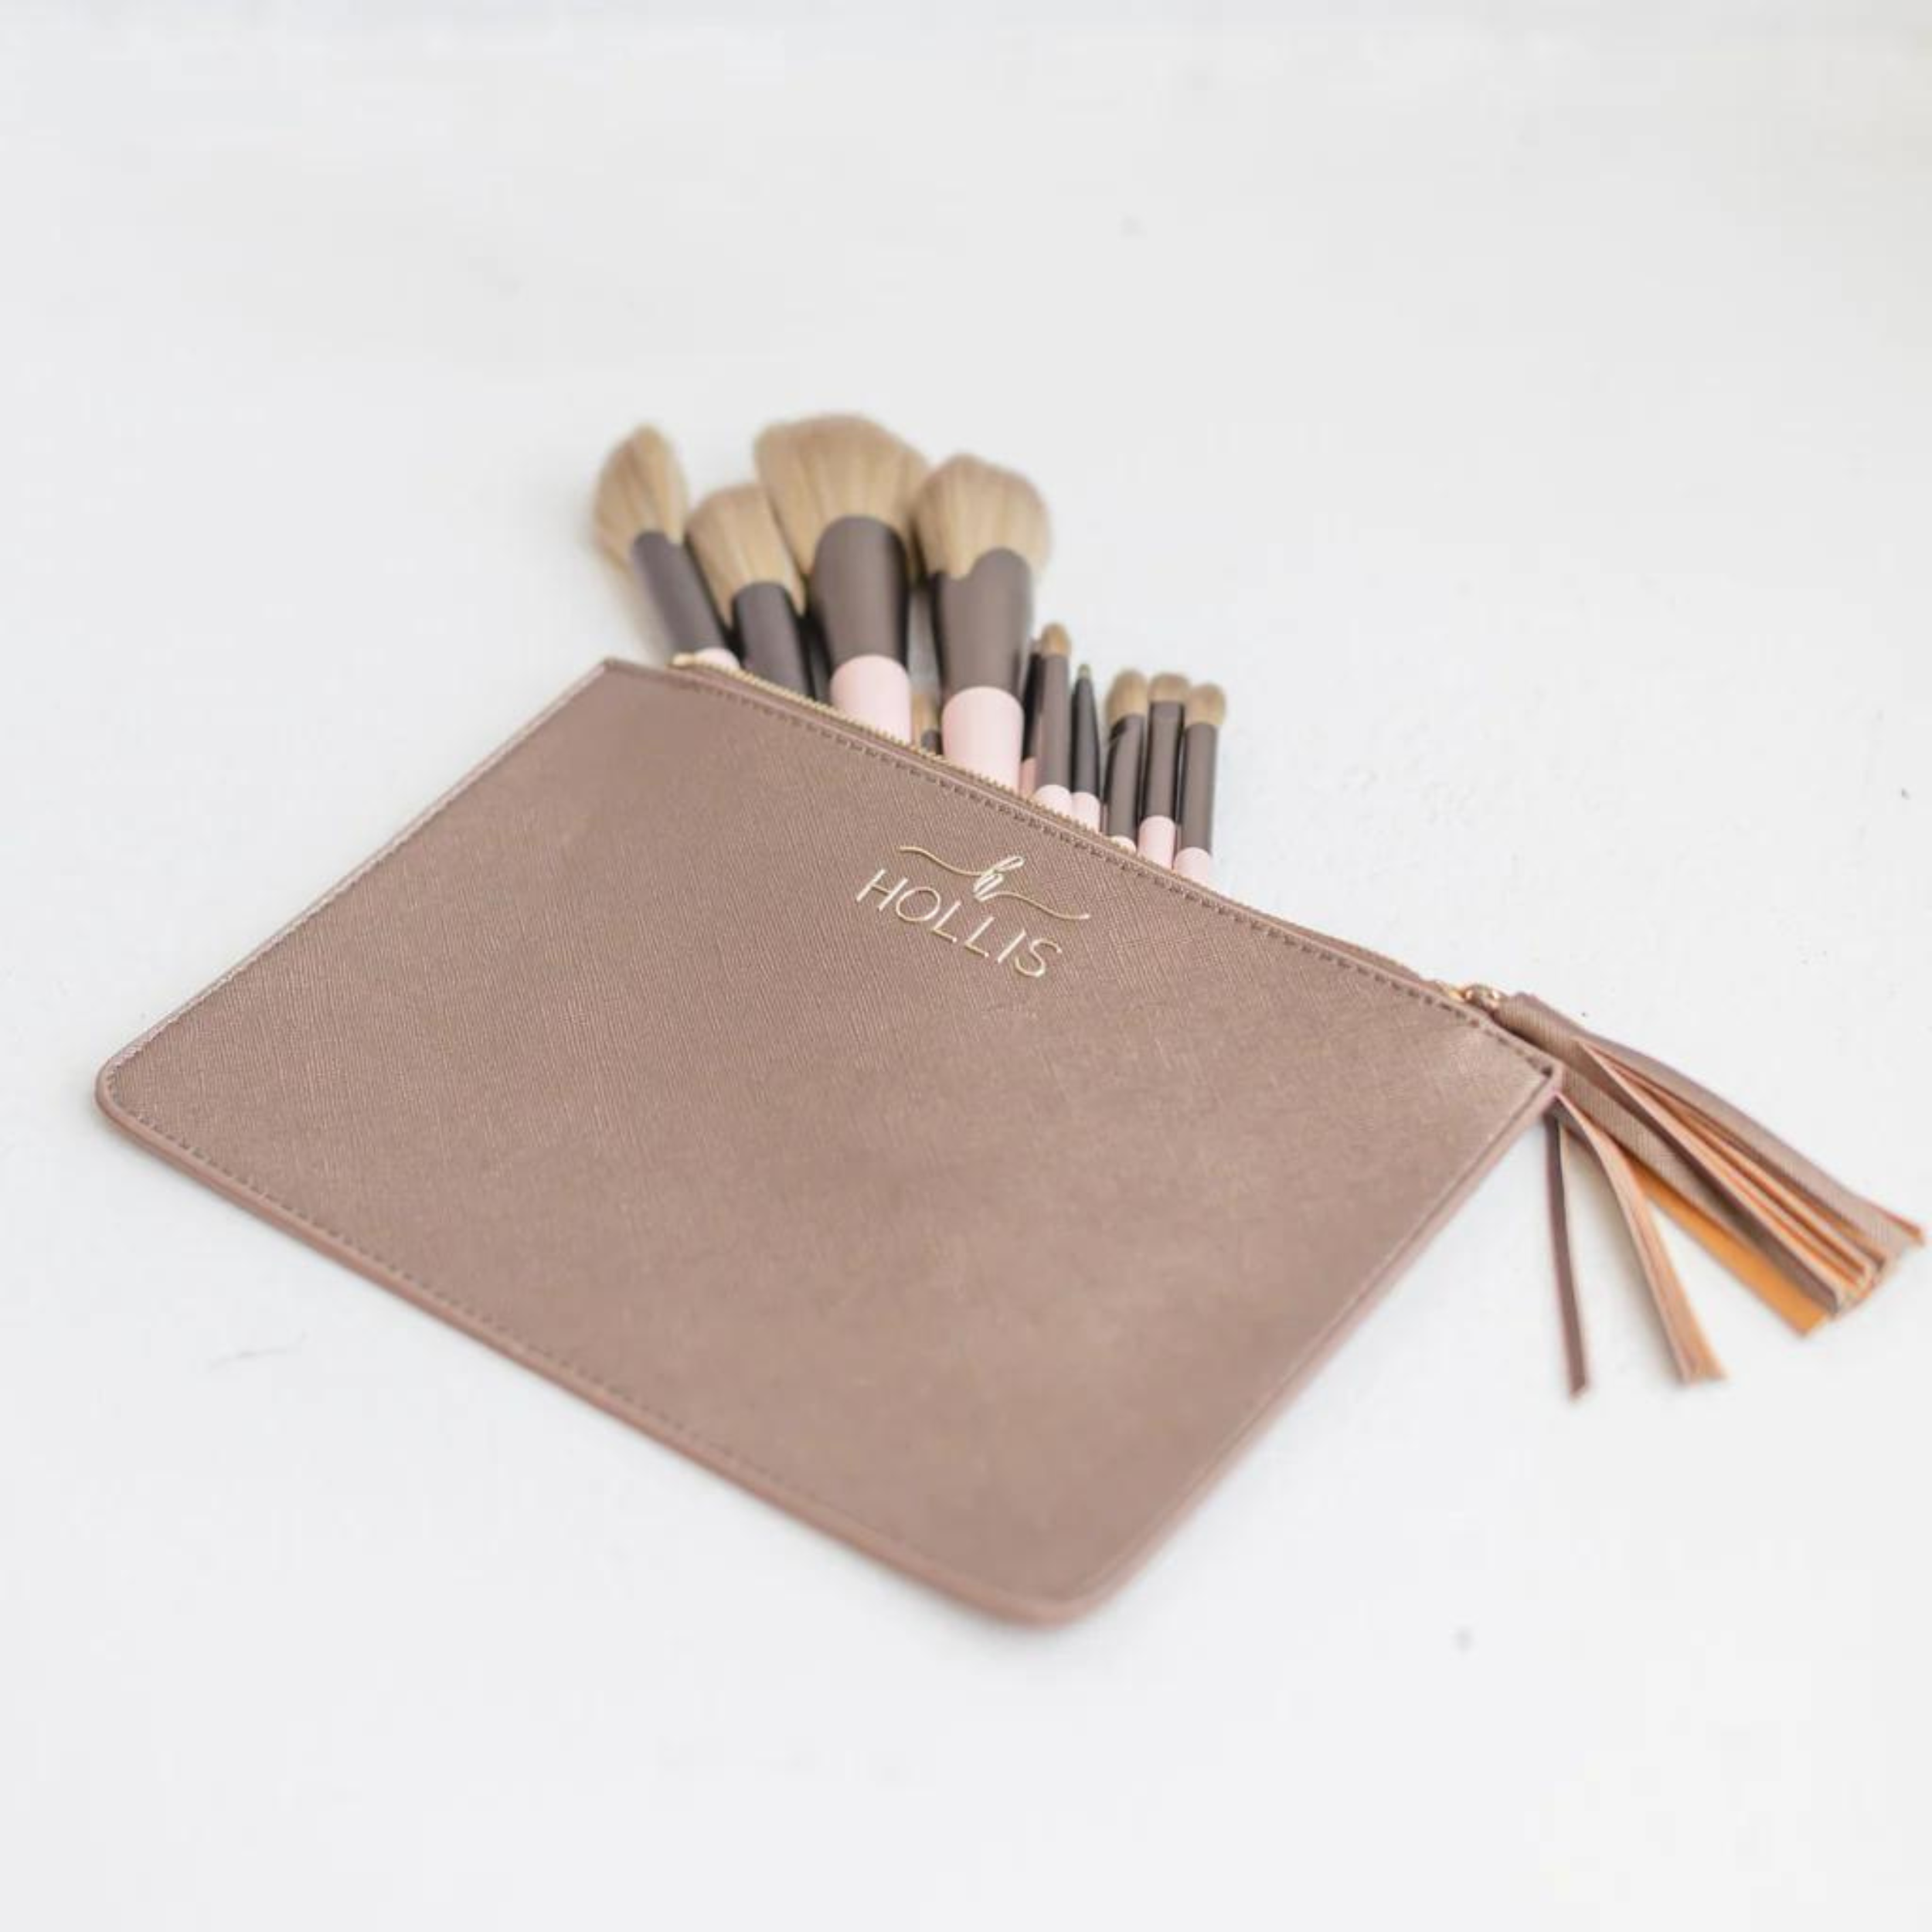 Hollis | Brush and Pouch Set in Metallic Mocha - Giddy Up Glamour Boutique